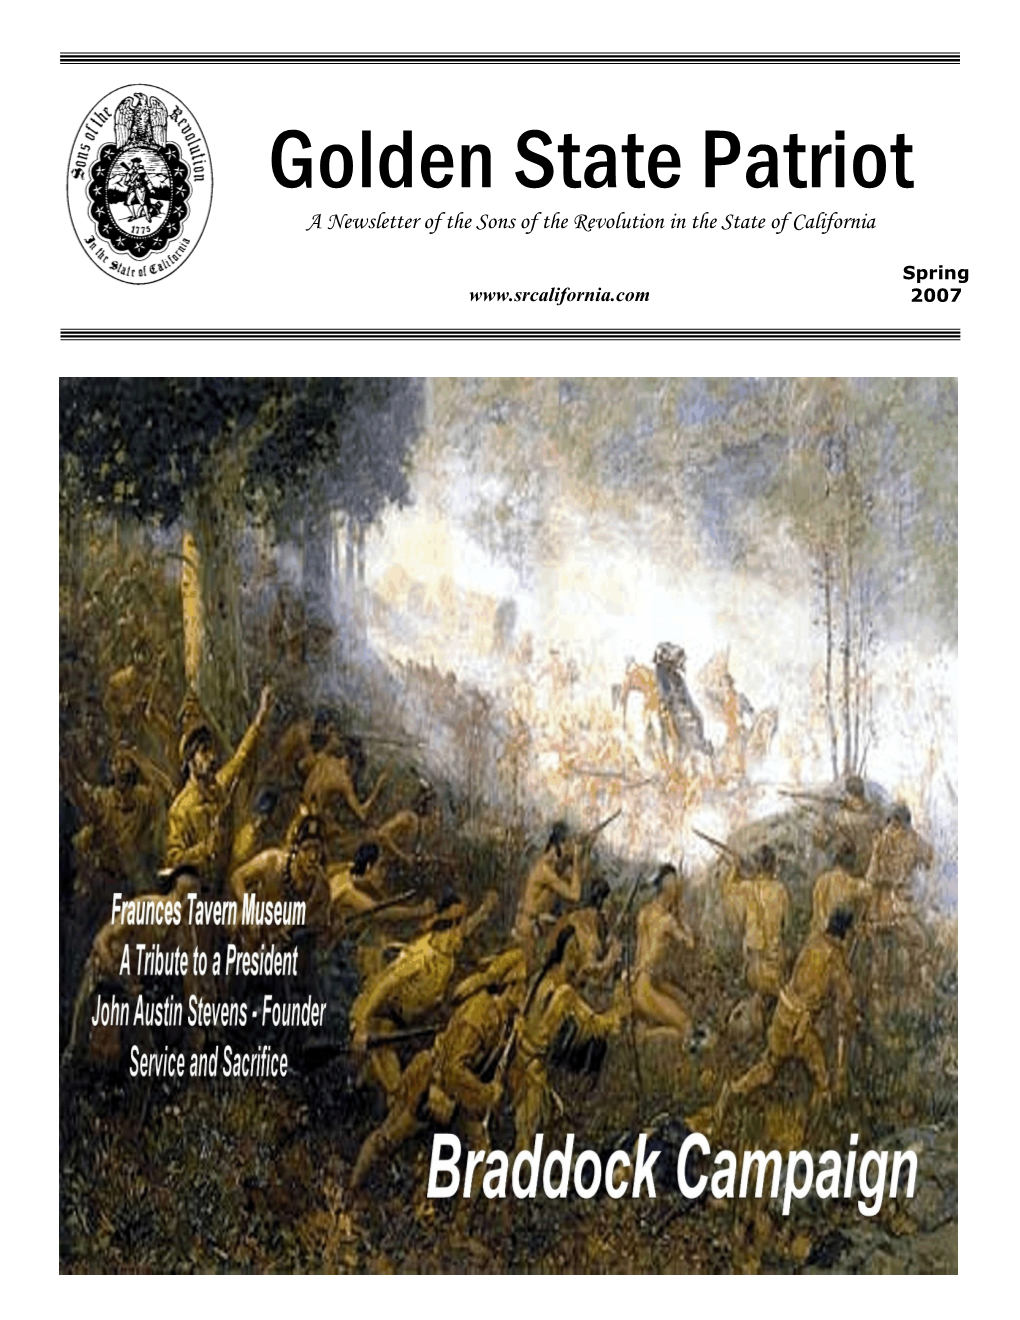 Golden State Patriot a Newsletter of the Sons of the Revolution in the State of California